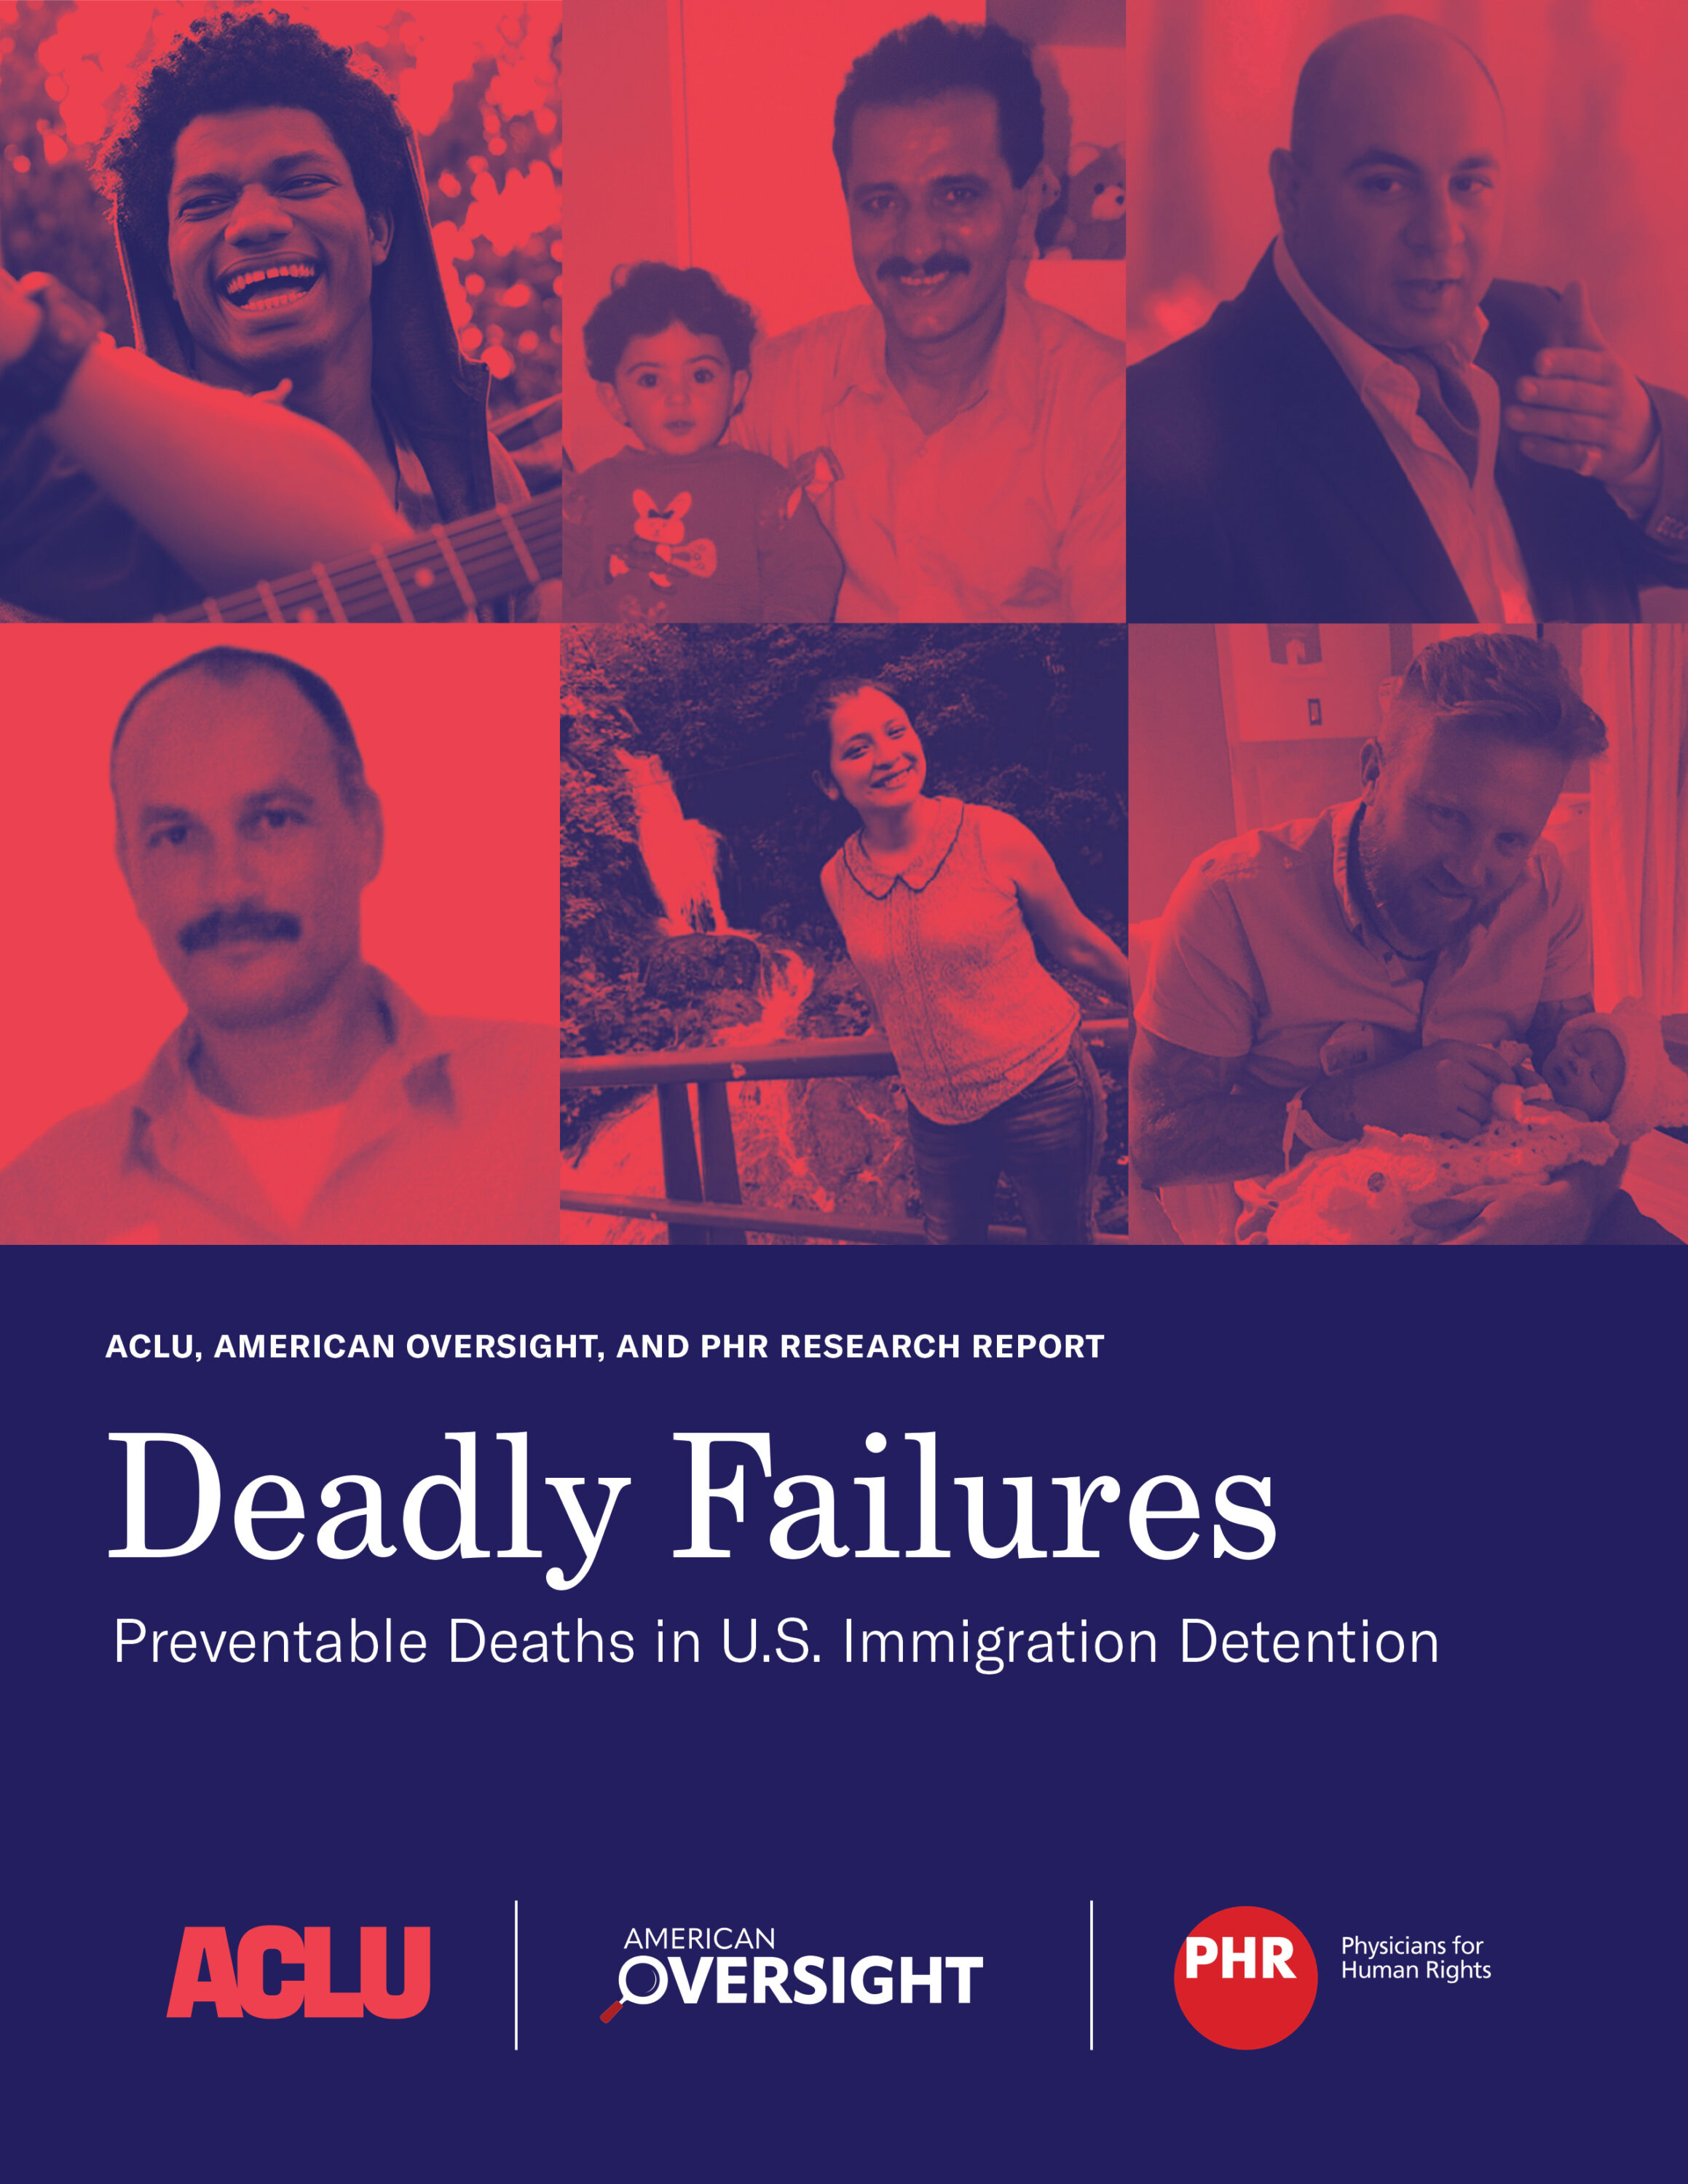 Deadly Failures: Preventable Deaths in U.S. Immigrant Detention cover image.